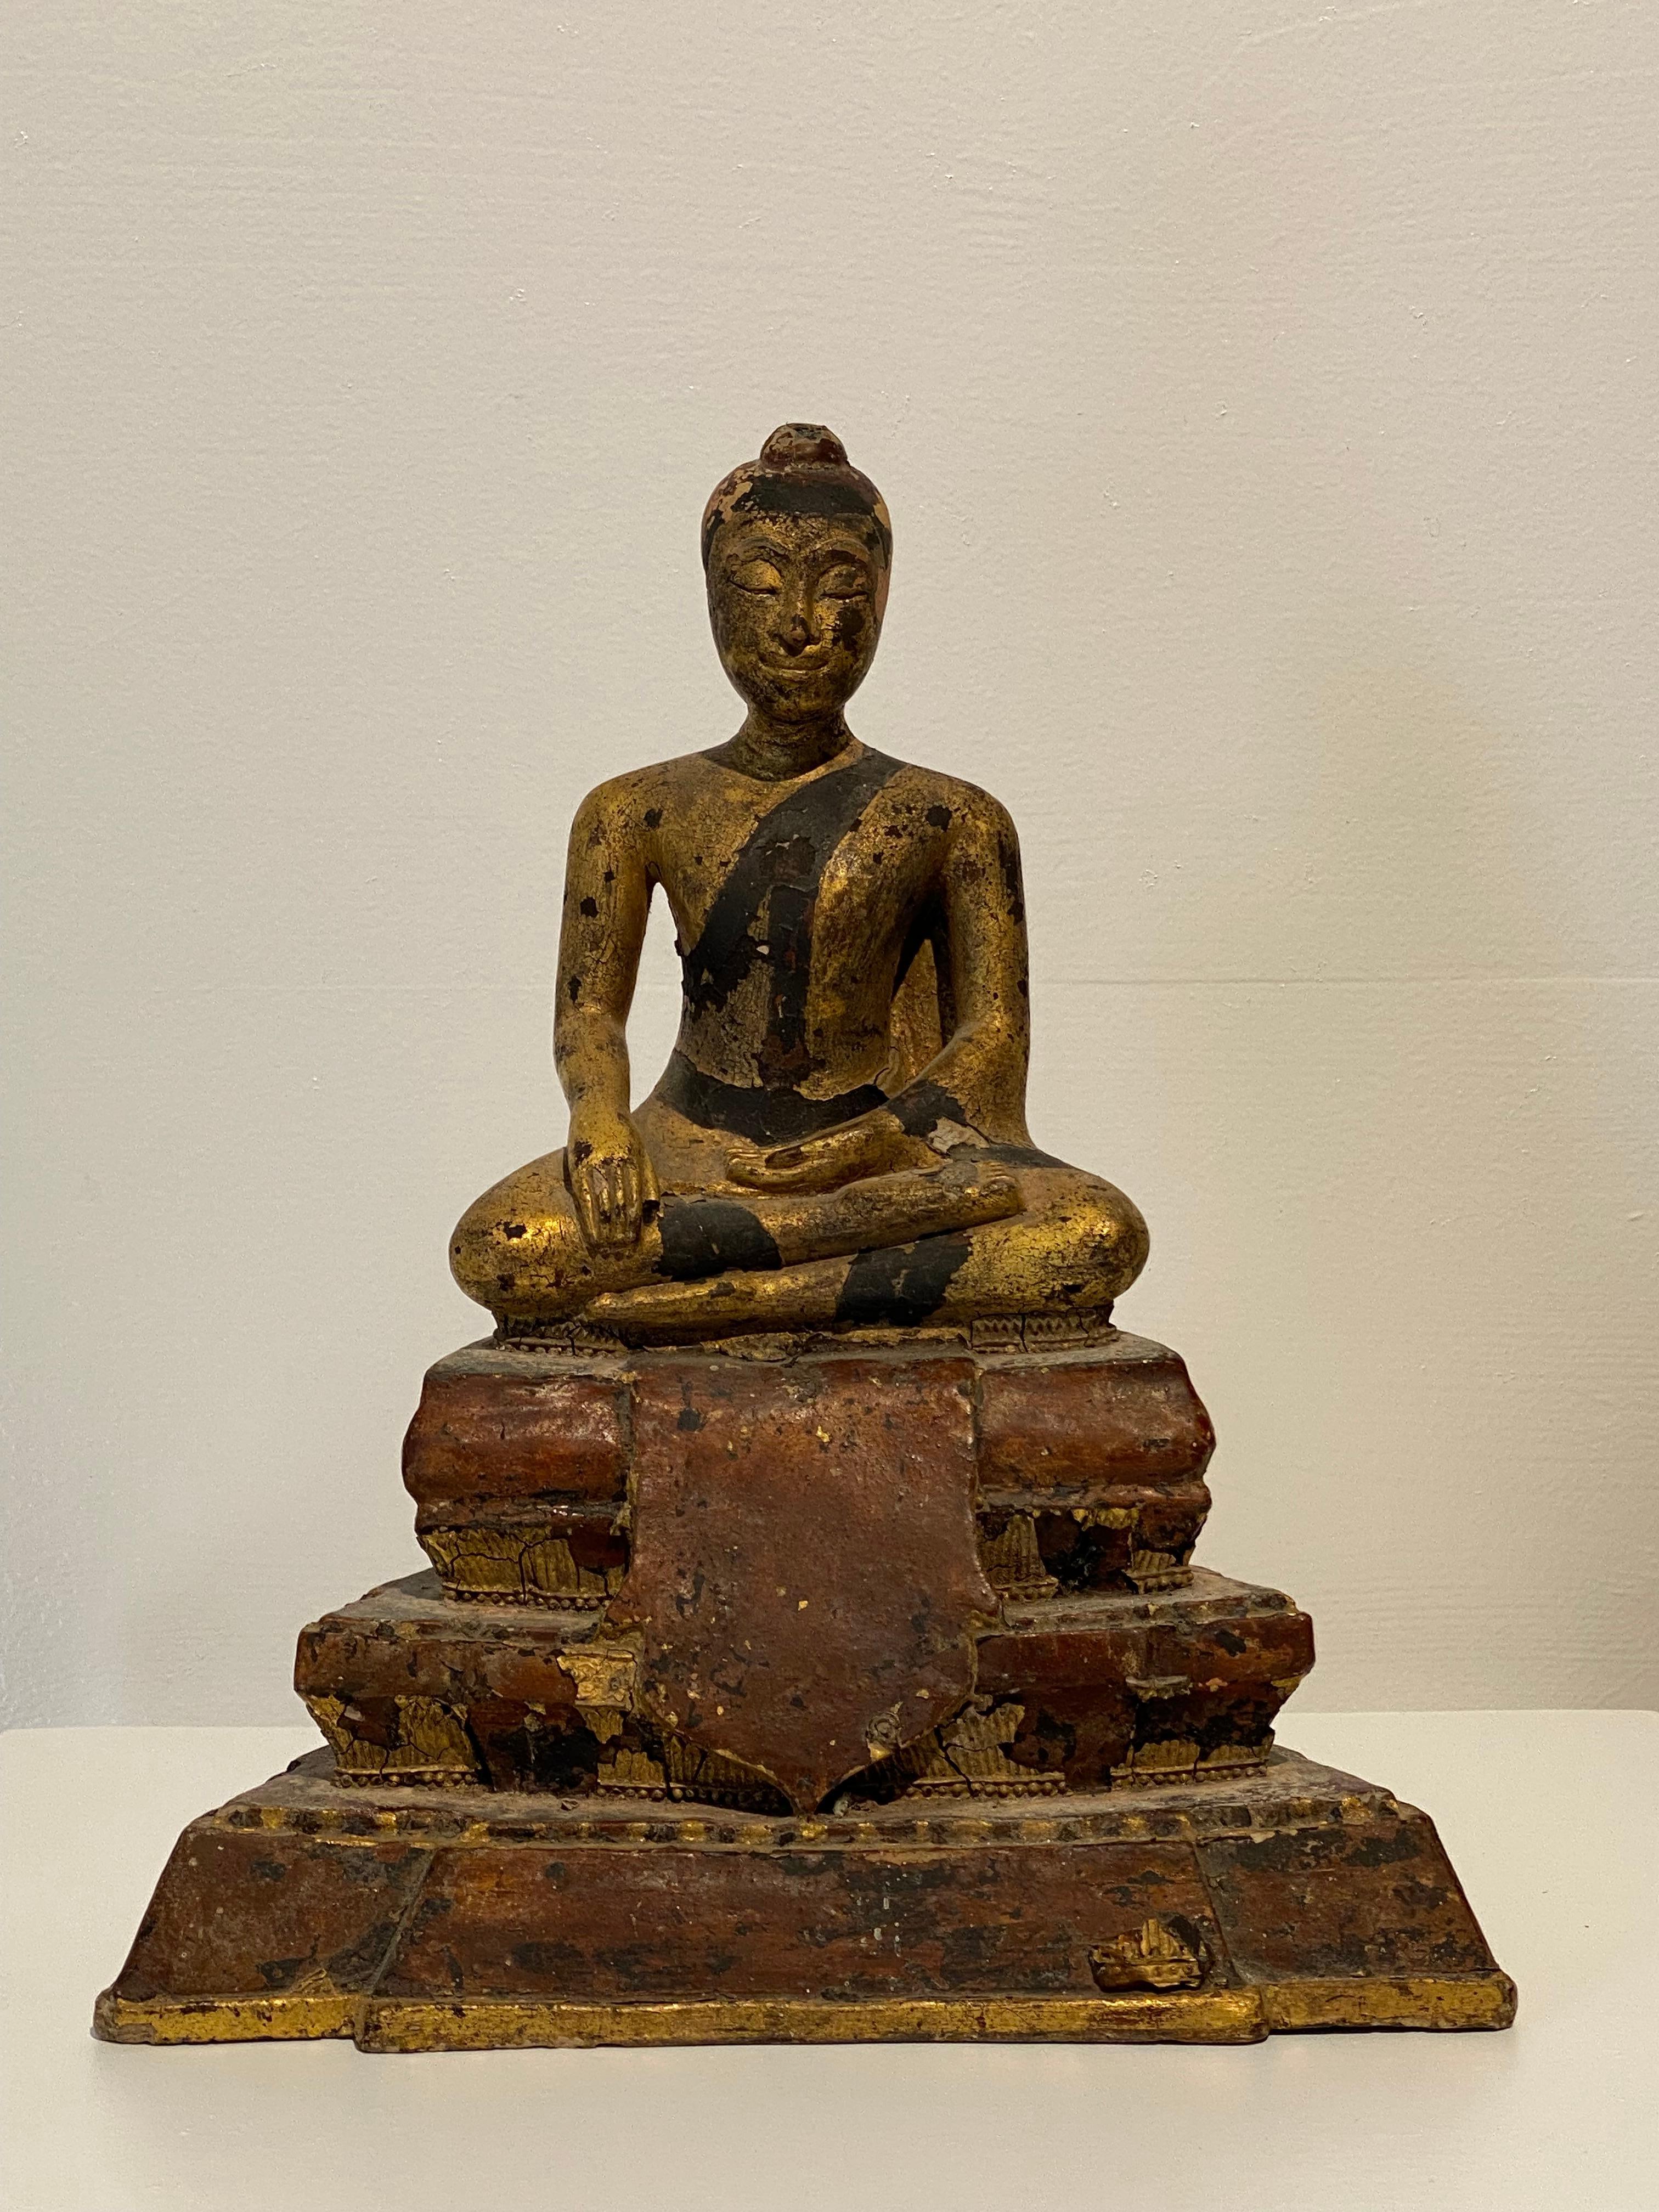 Elegant and refined Terracotta sculpture of Buddha,
beautiful patina of the polychromed and gilded terracotta,
seated Buddha with very elegant and refined features,
a good quality of an Asian piece, very decorative and powerful object